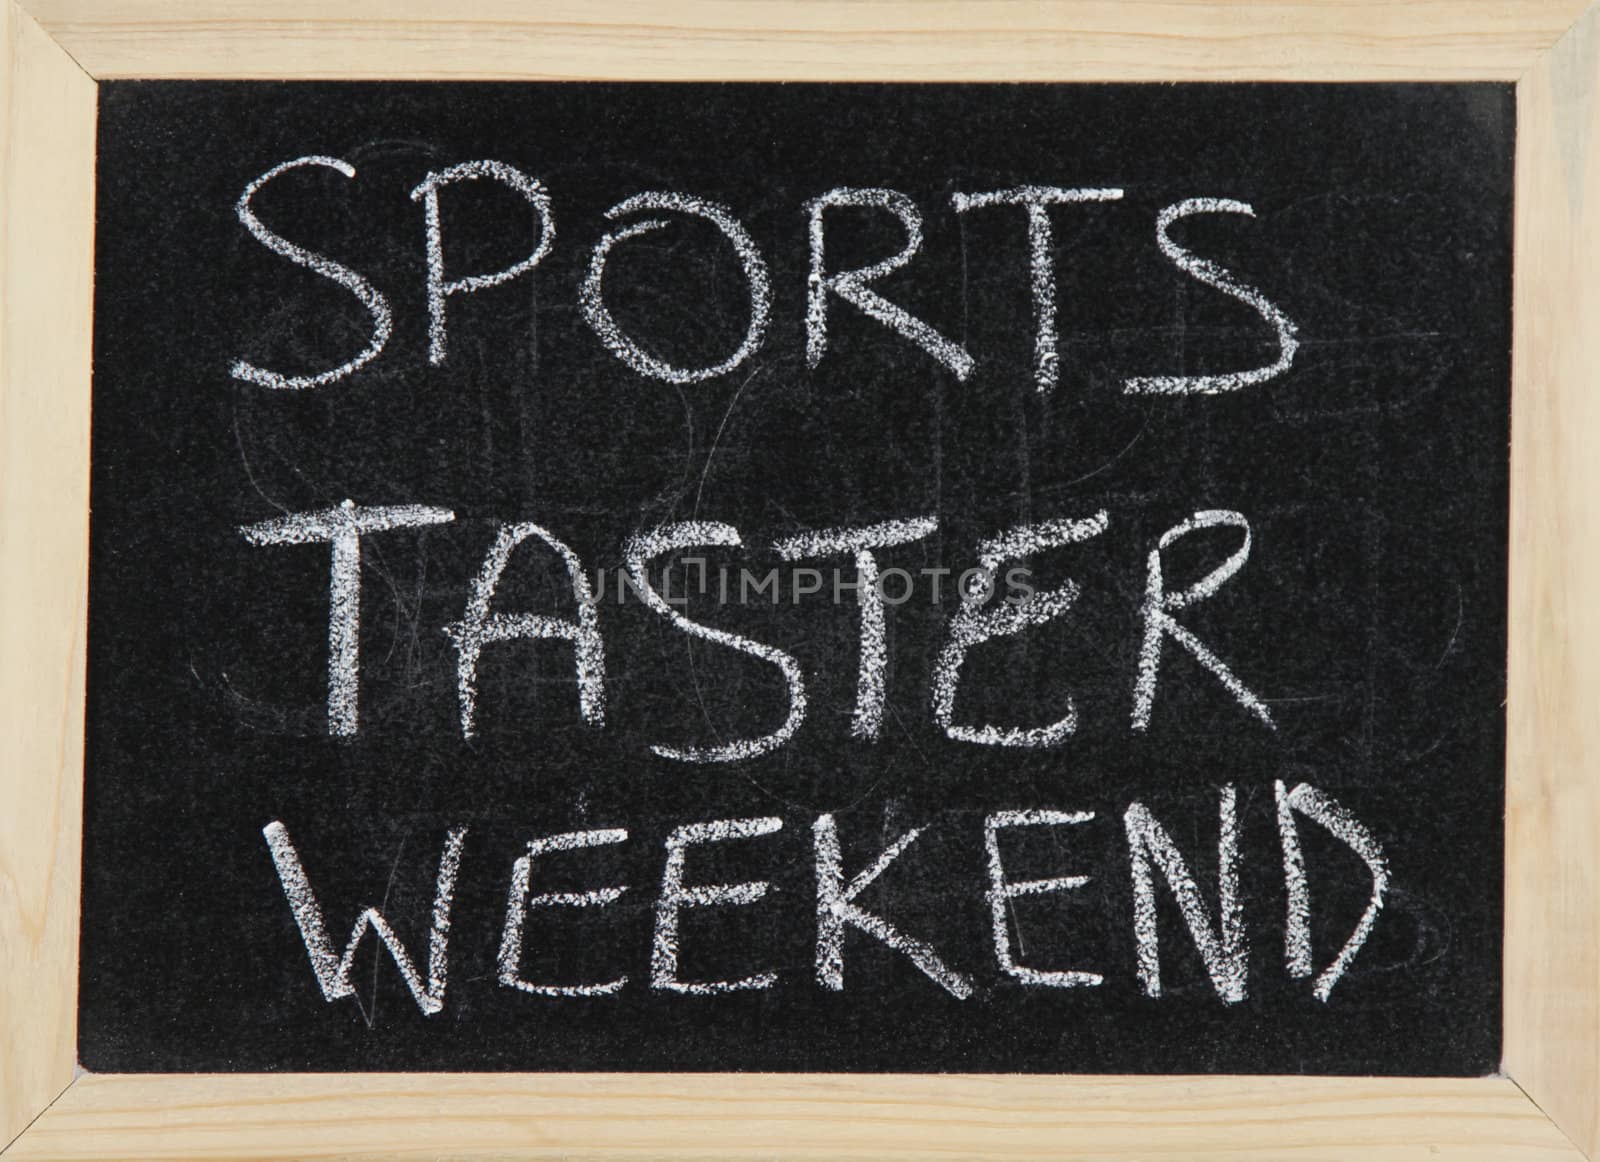 A blackboard with a wooden border with the words 'SPORTS TASTER WEEKEND' written by hand in white chalk.